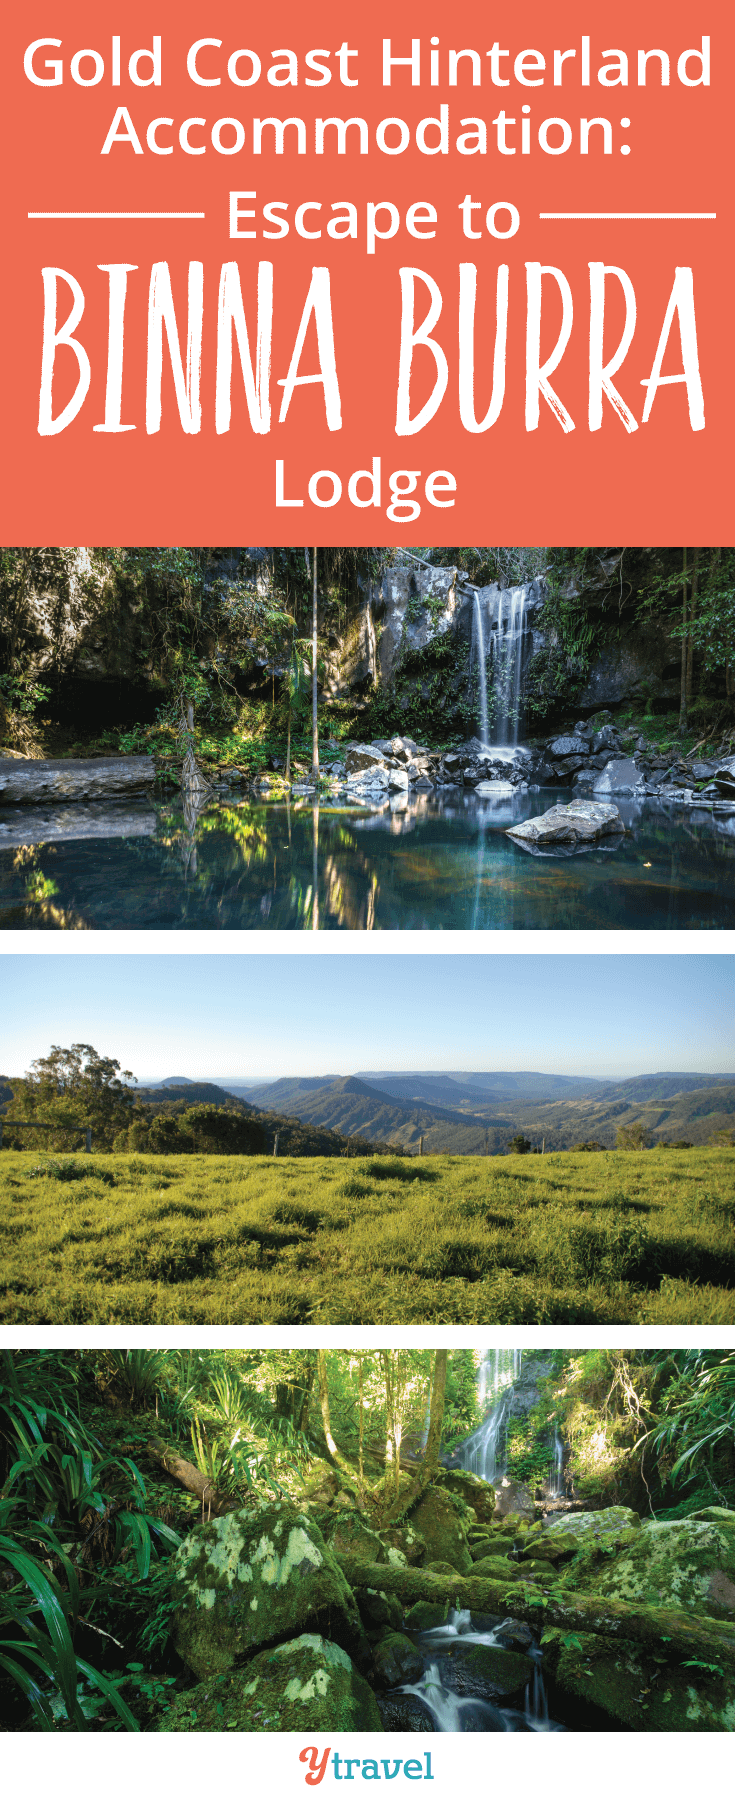 Looking for an awesome weekend getaway? Check out the Gold Coast Hinterland Accommodation at Binna Burra Lodge!